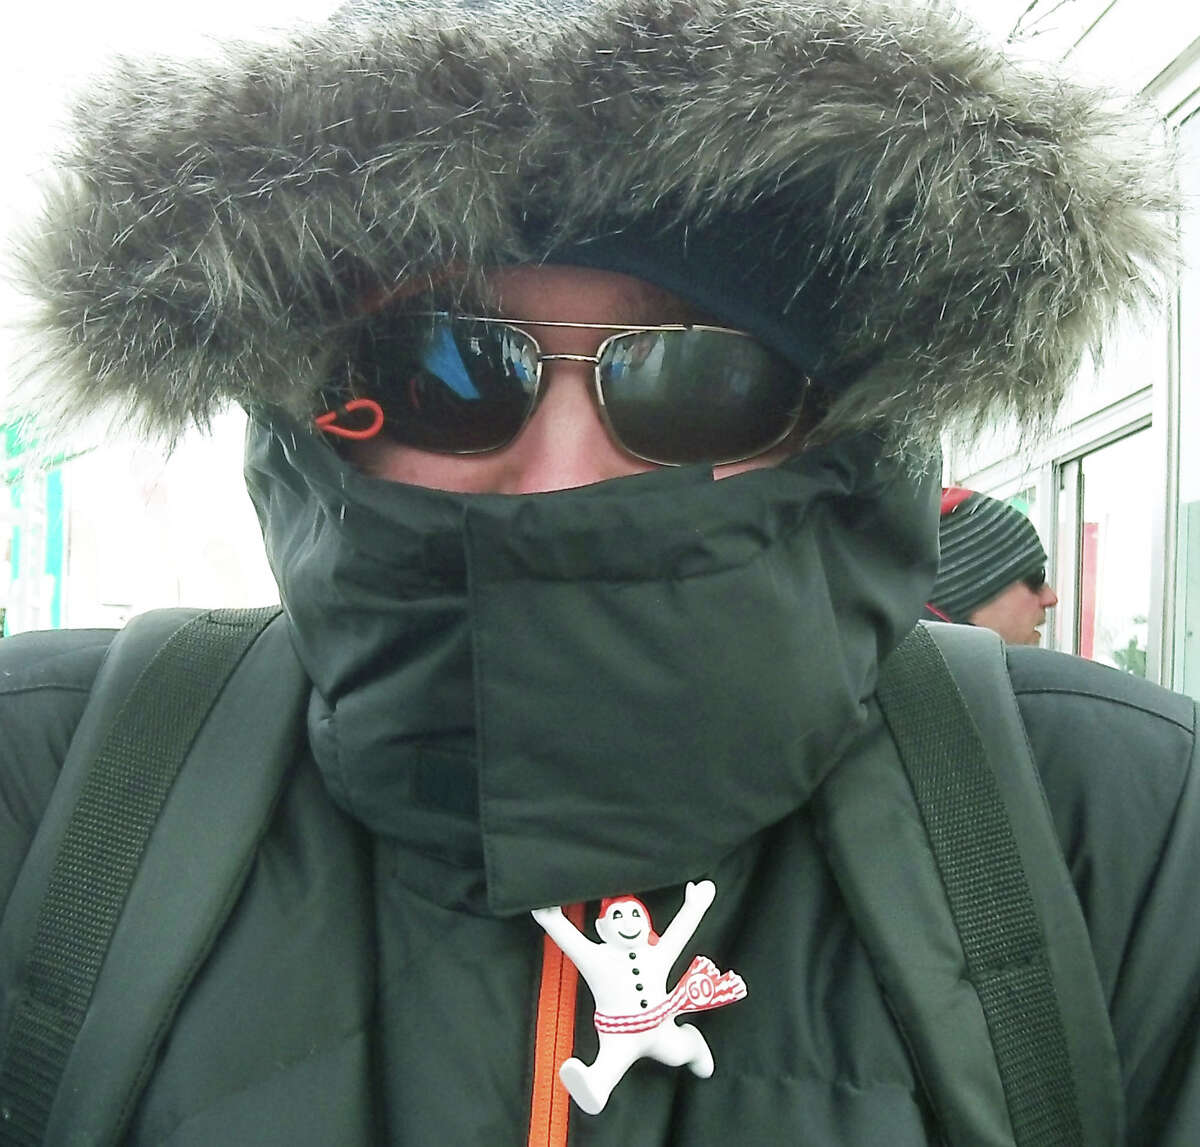 Daniel Kotas shlelds himself from the cold at Carnaval during a trip by 19 Shepaug Valley Middle/High School students to Quebec, Canada in February 2014 Courtesy of Heidi Edel